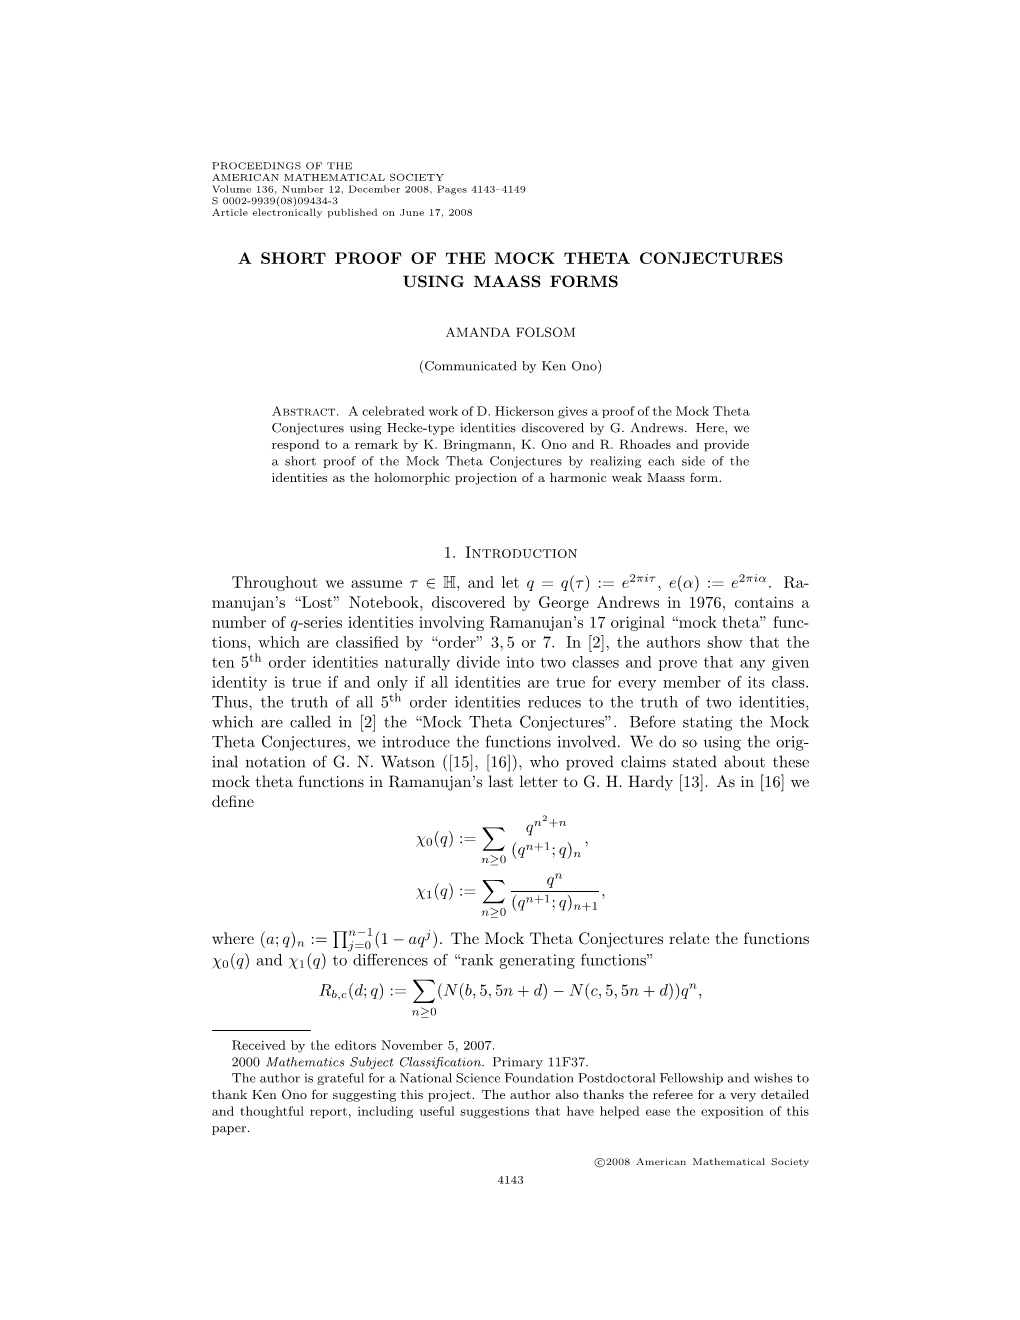 A Short Proof of the Mock Theta Conjectures Using Maass Forms